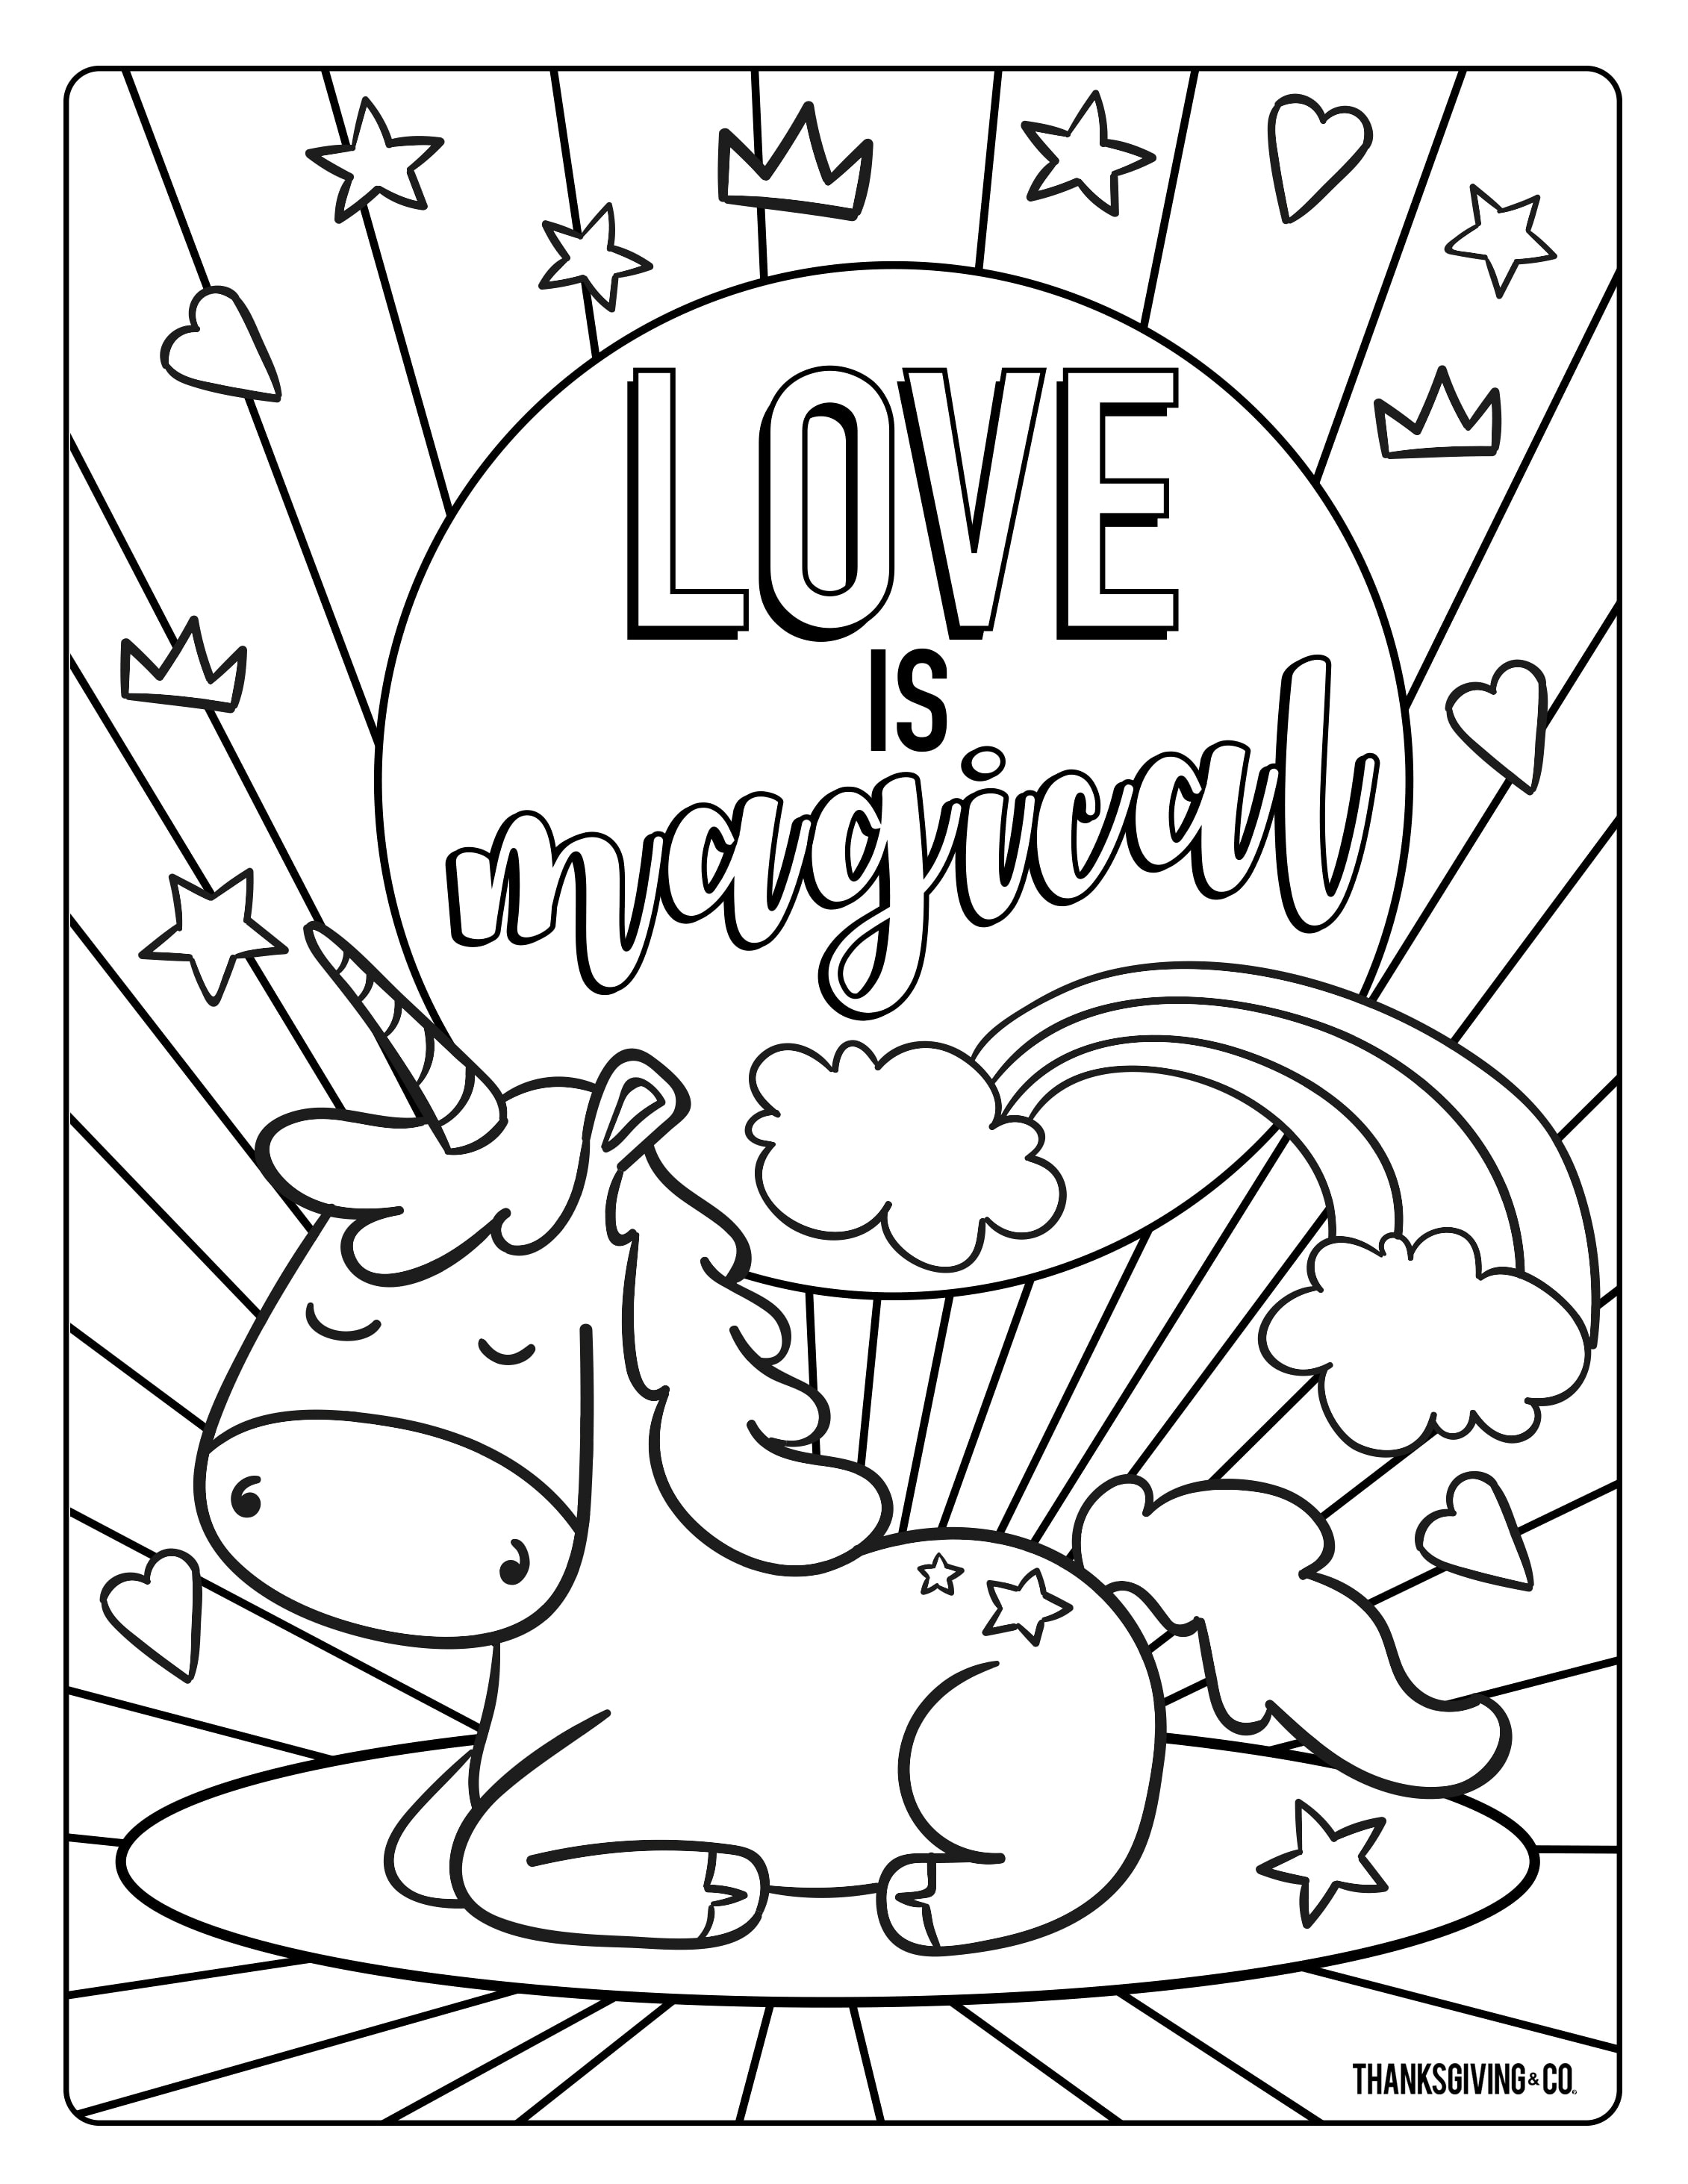 4 free Valentine's Day coloring pages for kids